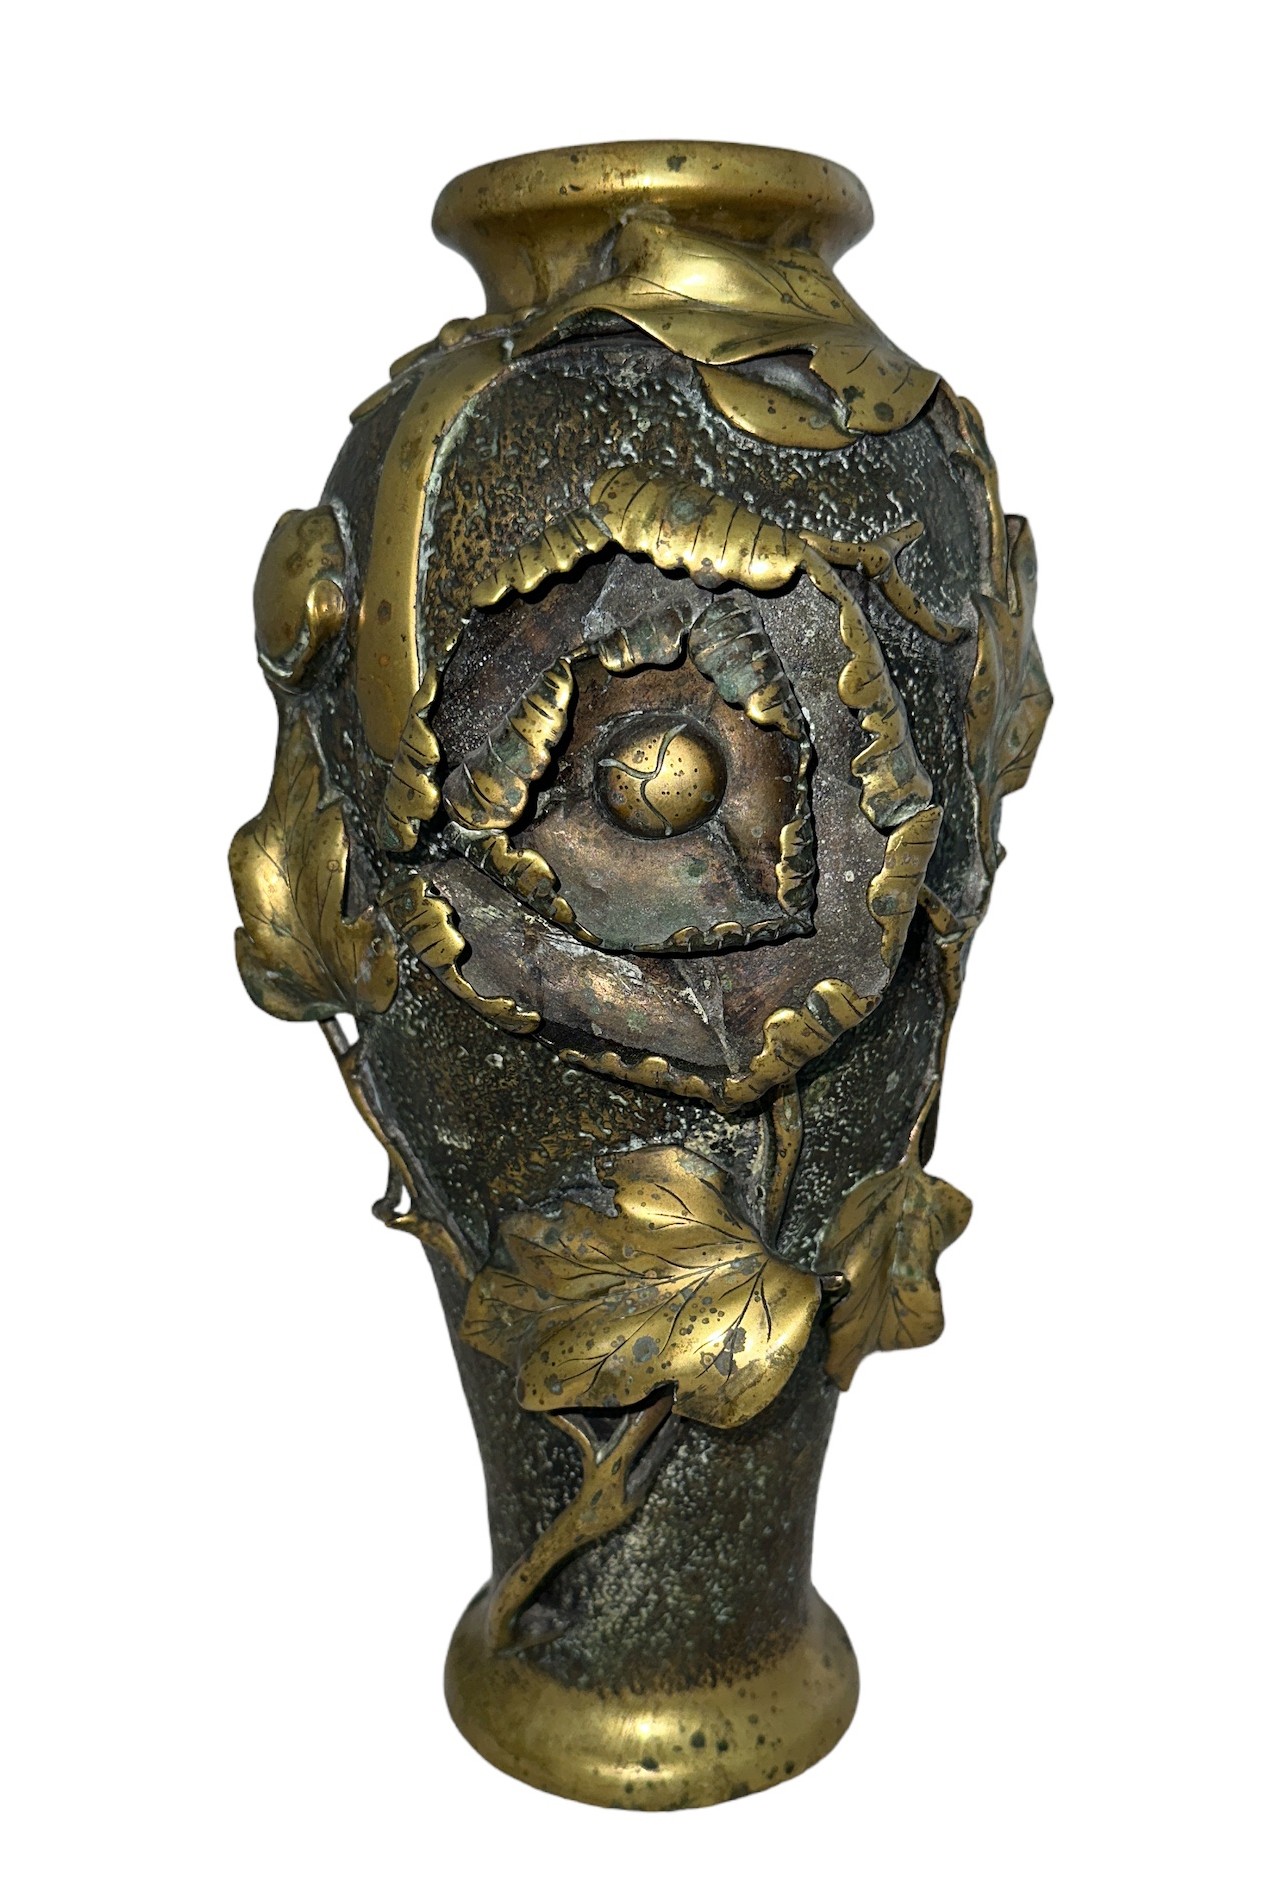 Japanese bronze floral vase, with floral and leaf relief decorations to side, marked to base. Heavy.